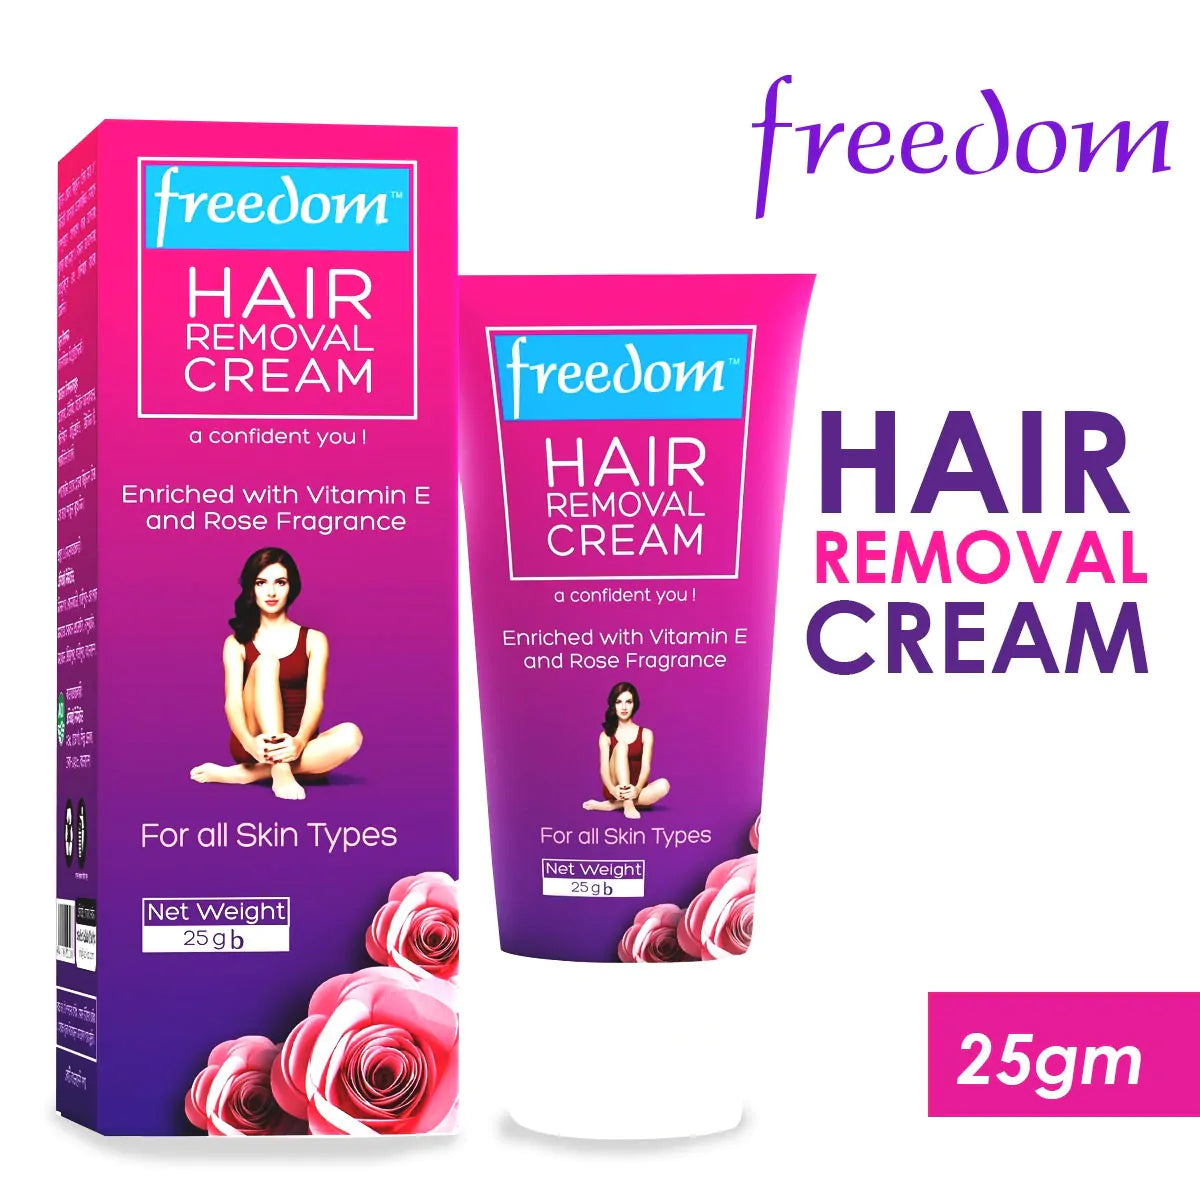 Freedom Hair Removal Cream 25ml (Buy 1 Get 1 Free)